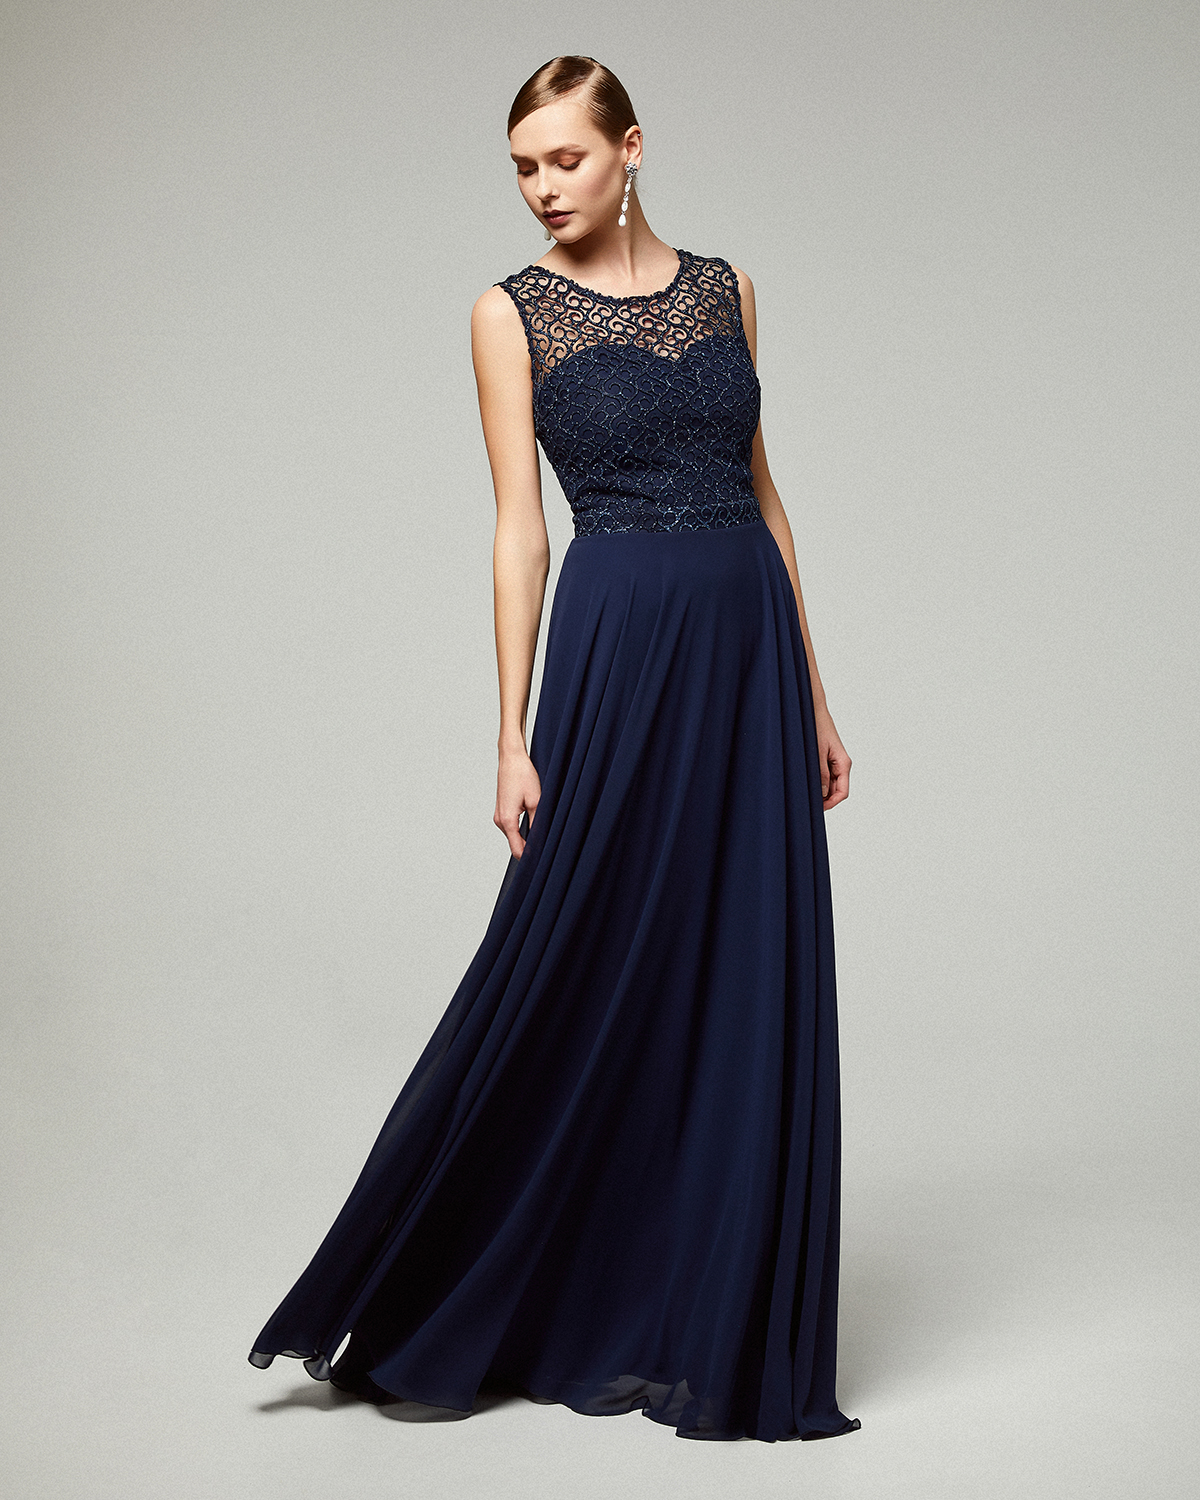 Classic Dresses / Long evening chiffon dress with beaded lace on the top for the mother of the bride